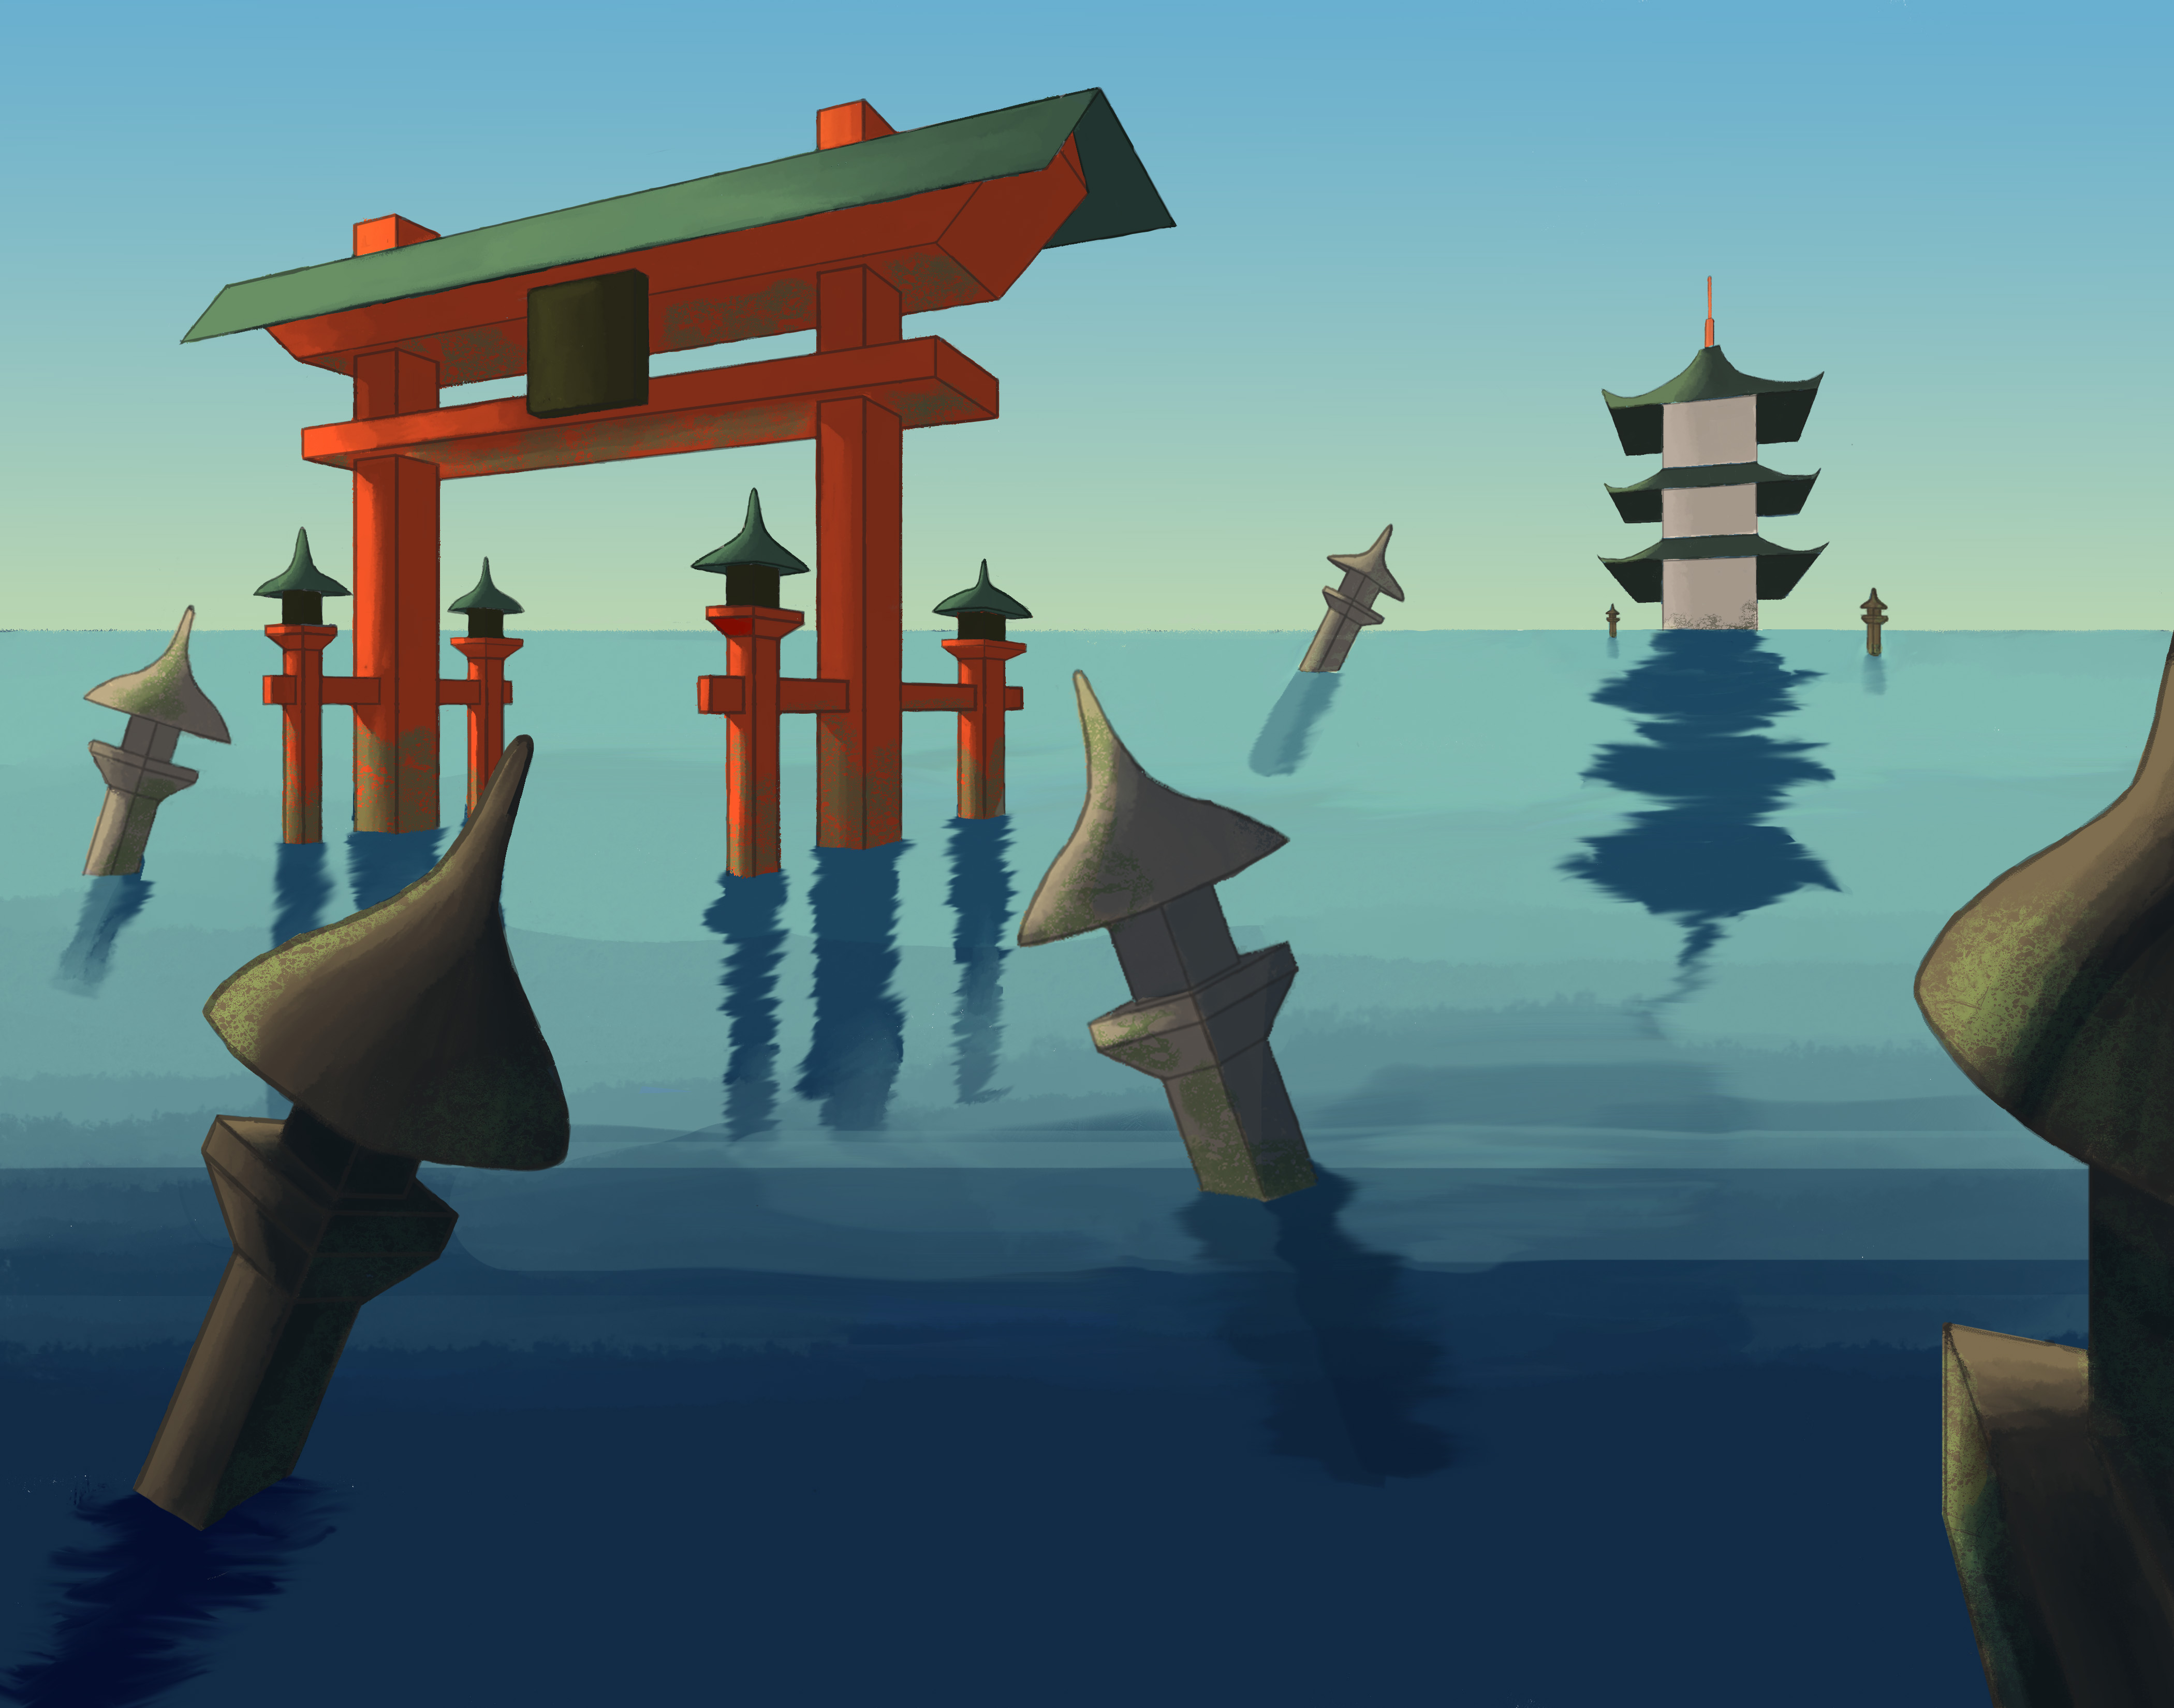  / An environmental background of a lake with a torii, stone lanterns, and a pagoda in the distance made in photoshop.